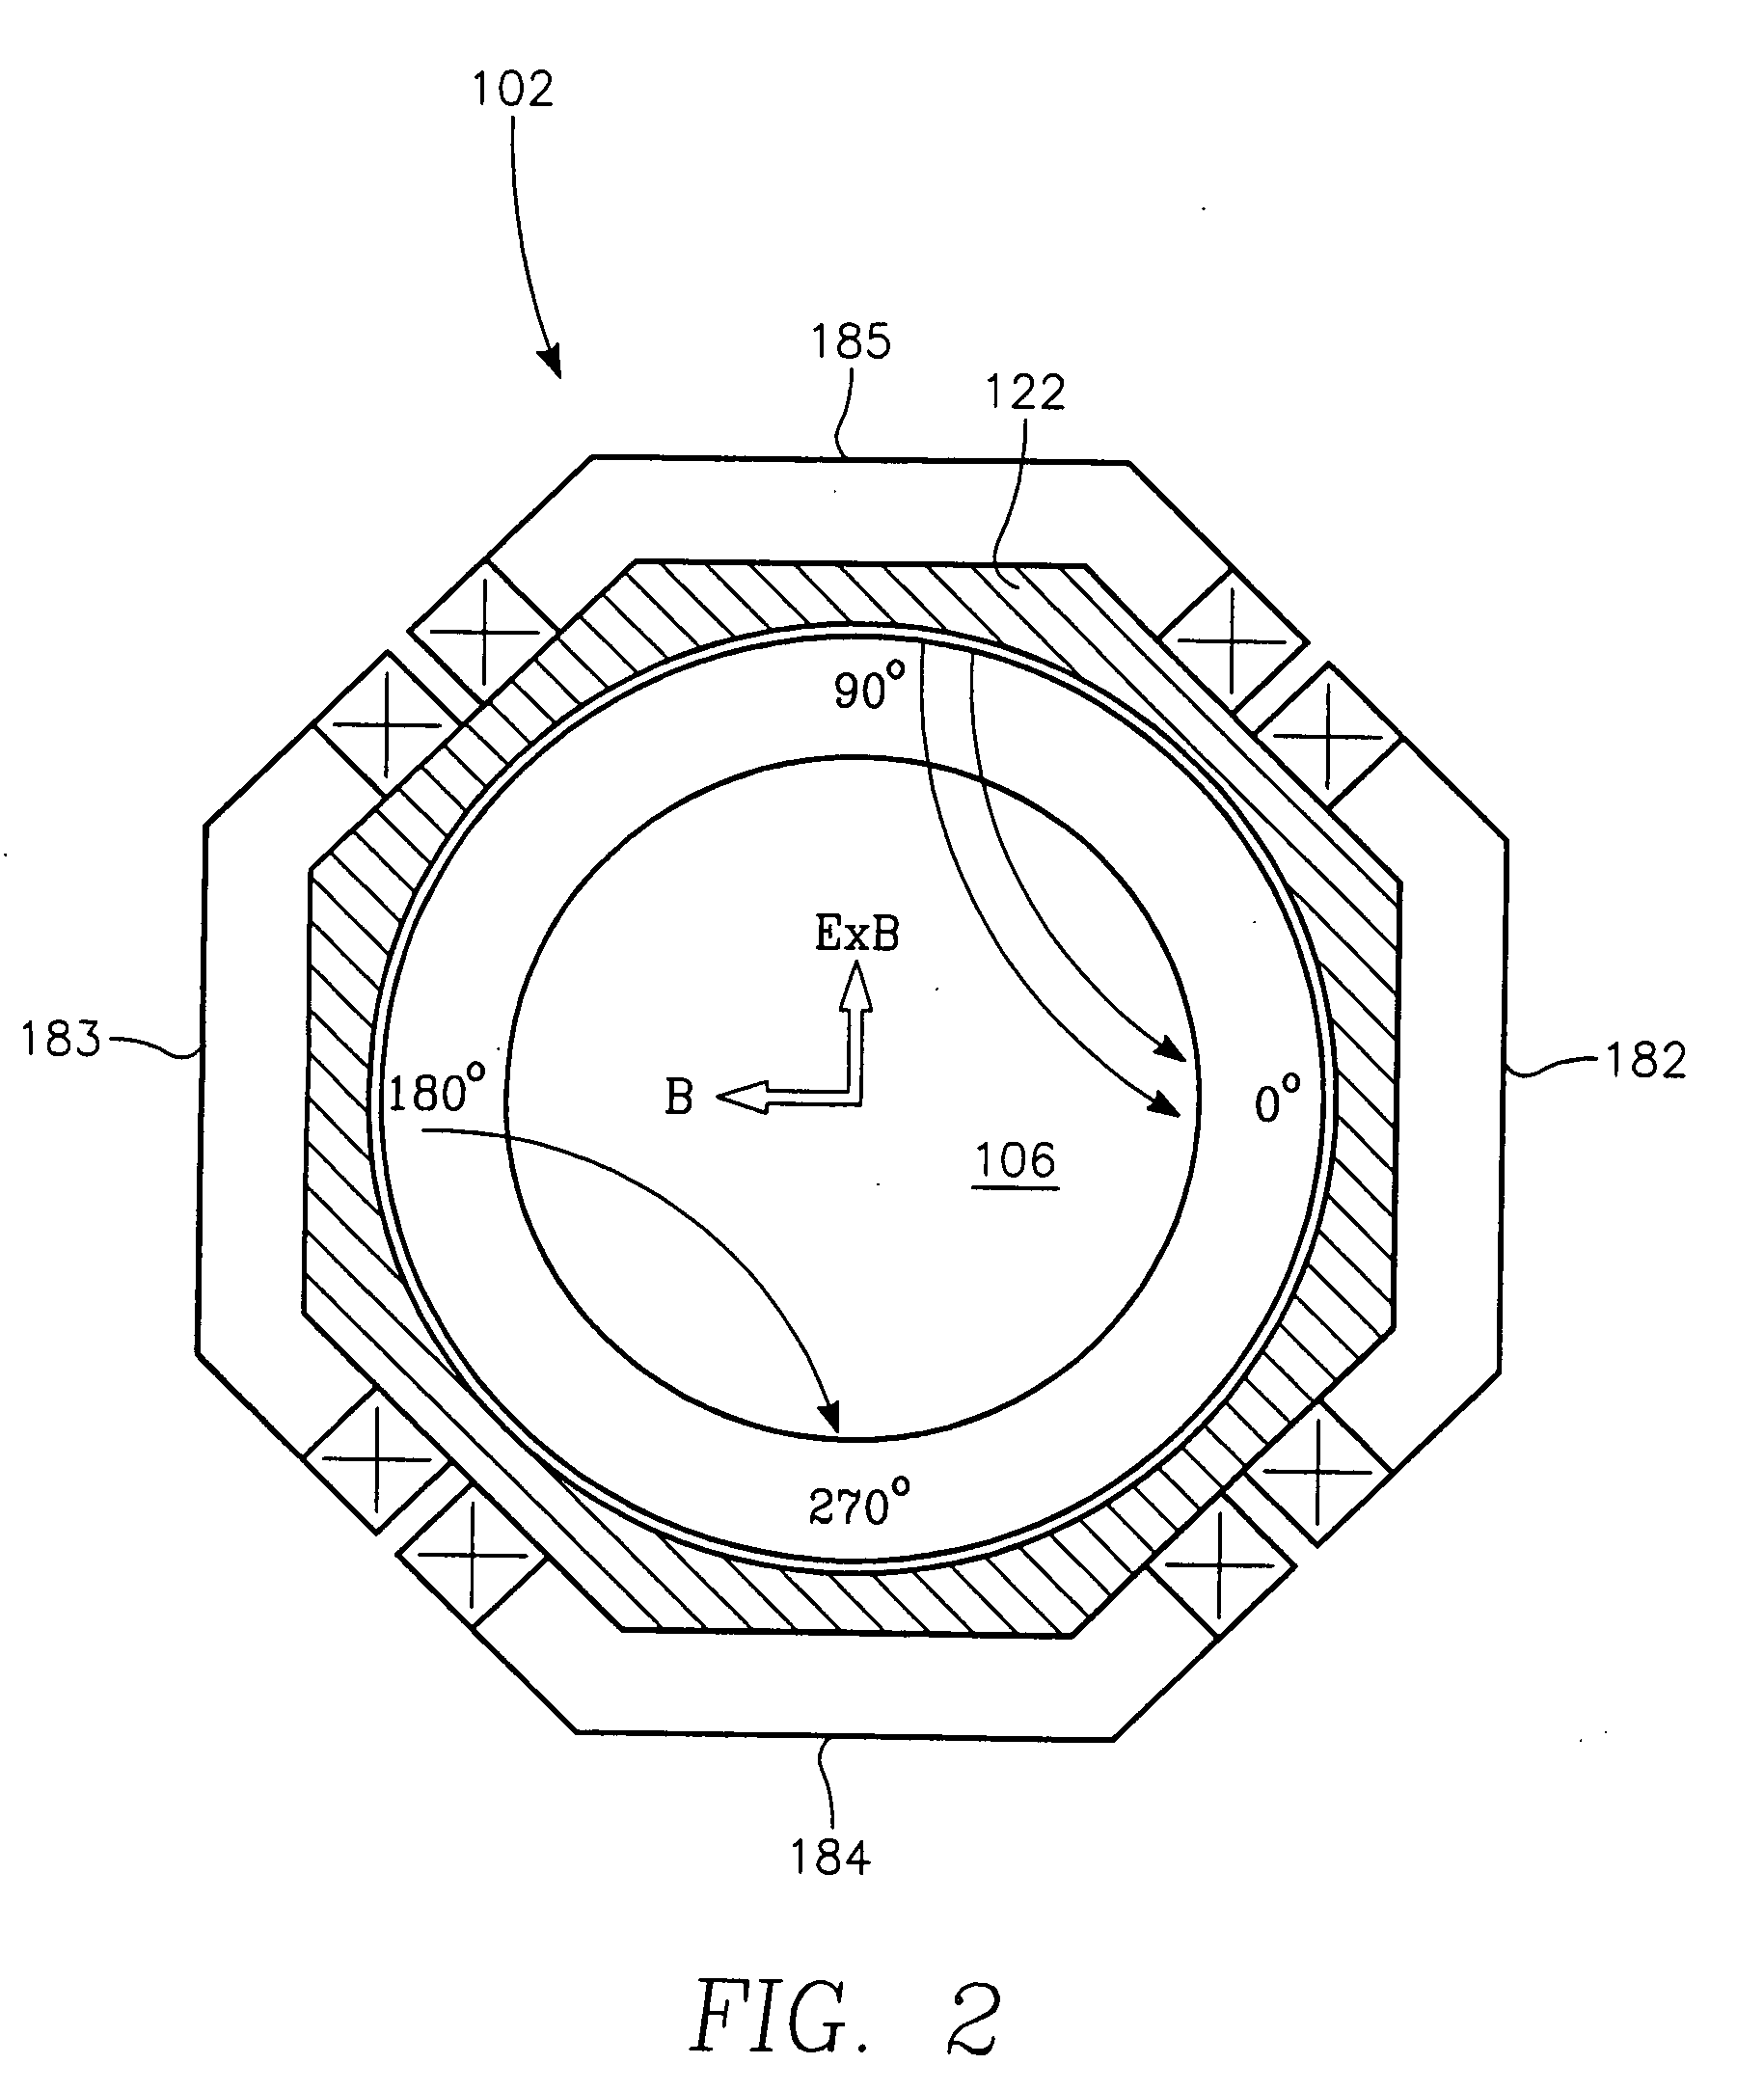 Etch chamber with dual frequency biasing sources and a single frequency plasma generating source